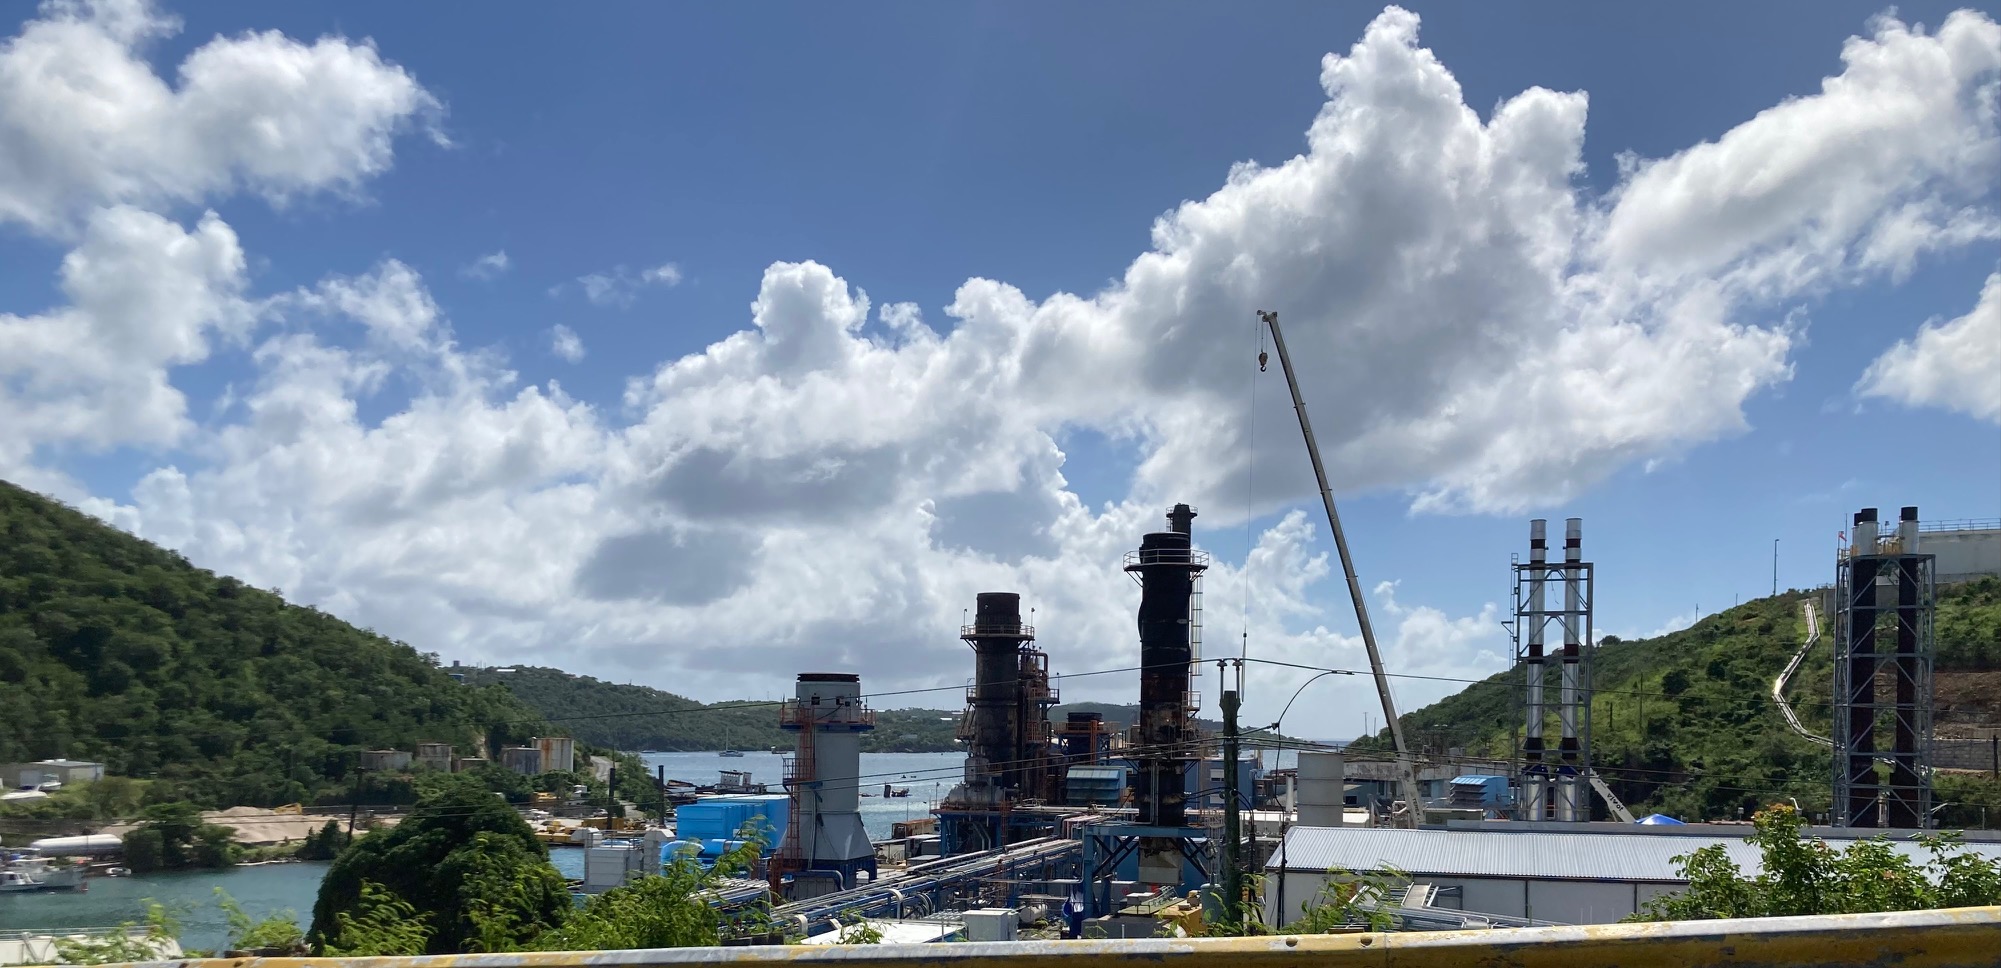 The Water and Power Authority's Randolph Harley Power Plant on St. Thomas. (Source photo by Mat Probasco)